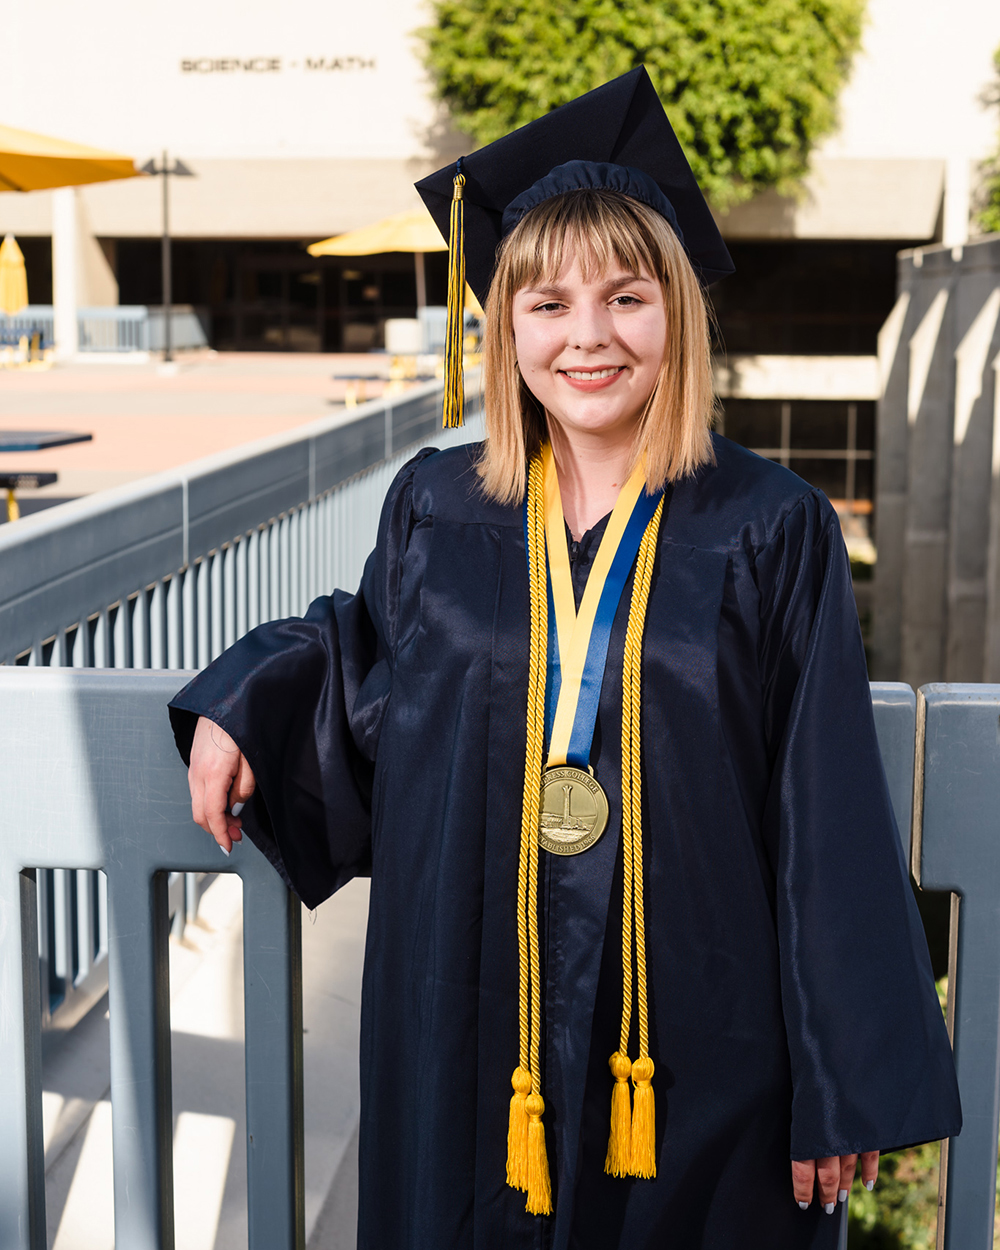 Student Bradi Palomarez stands in front of the Science and Math building on campus, wearing graduation regalia.